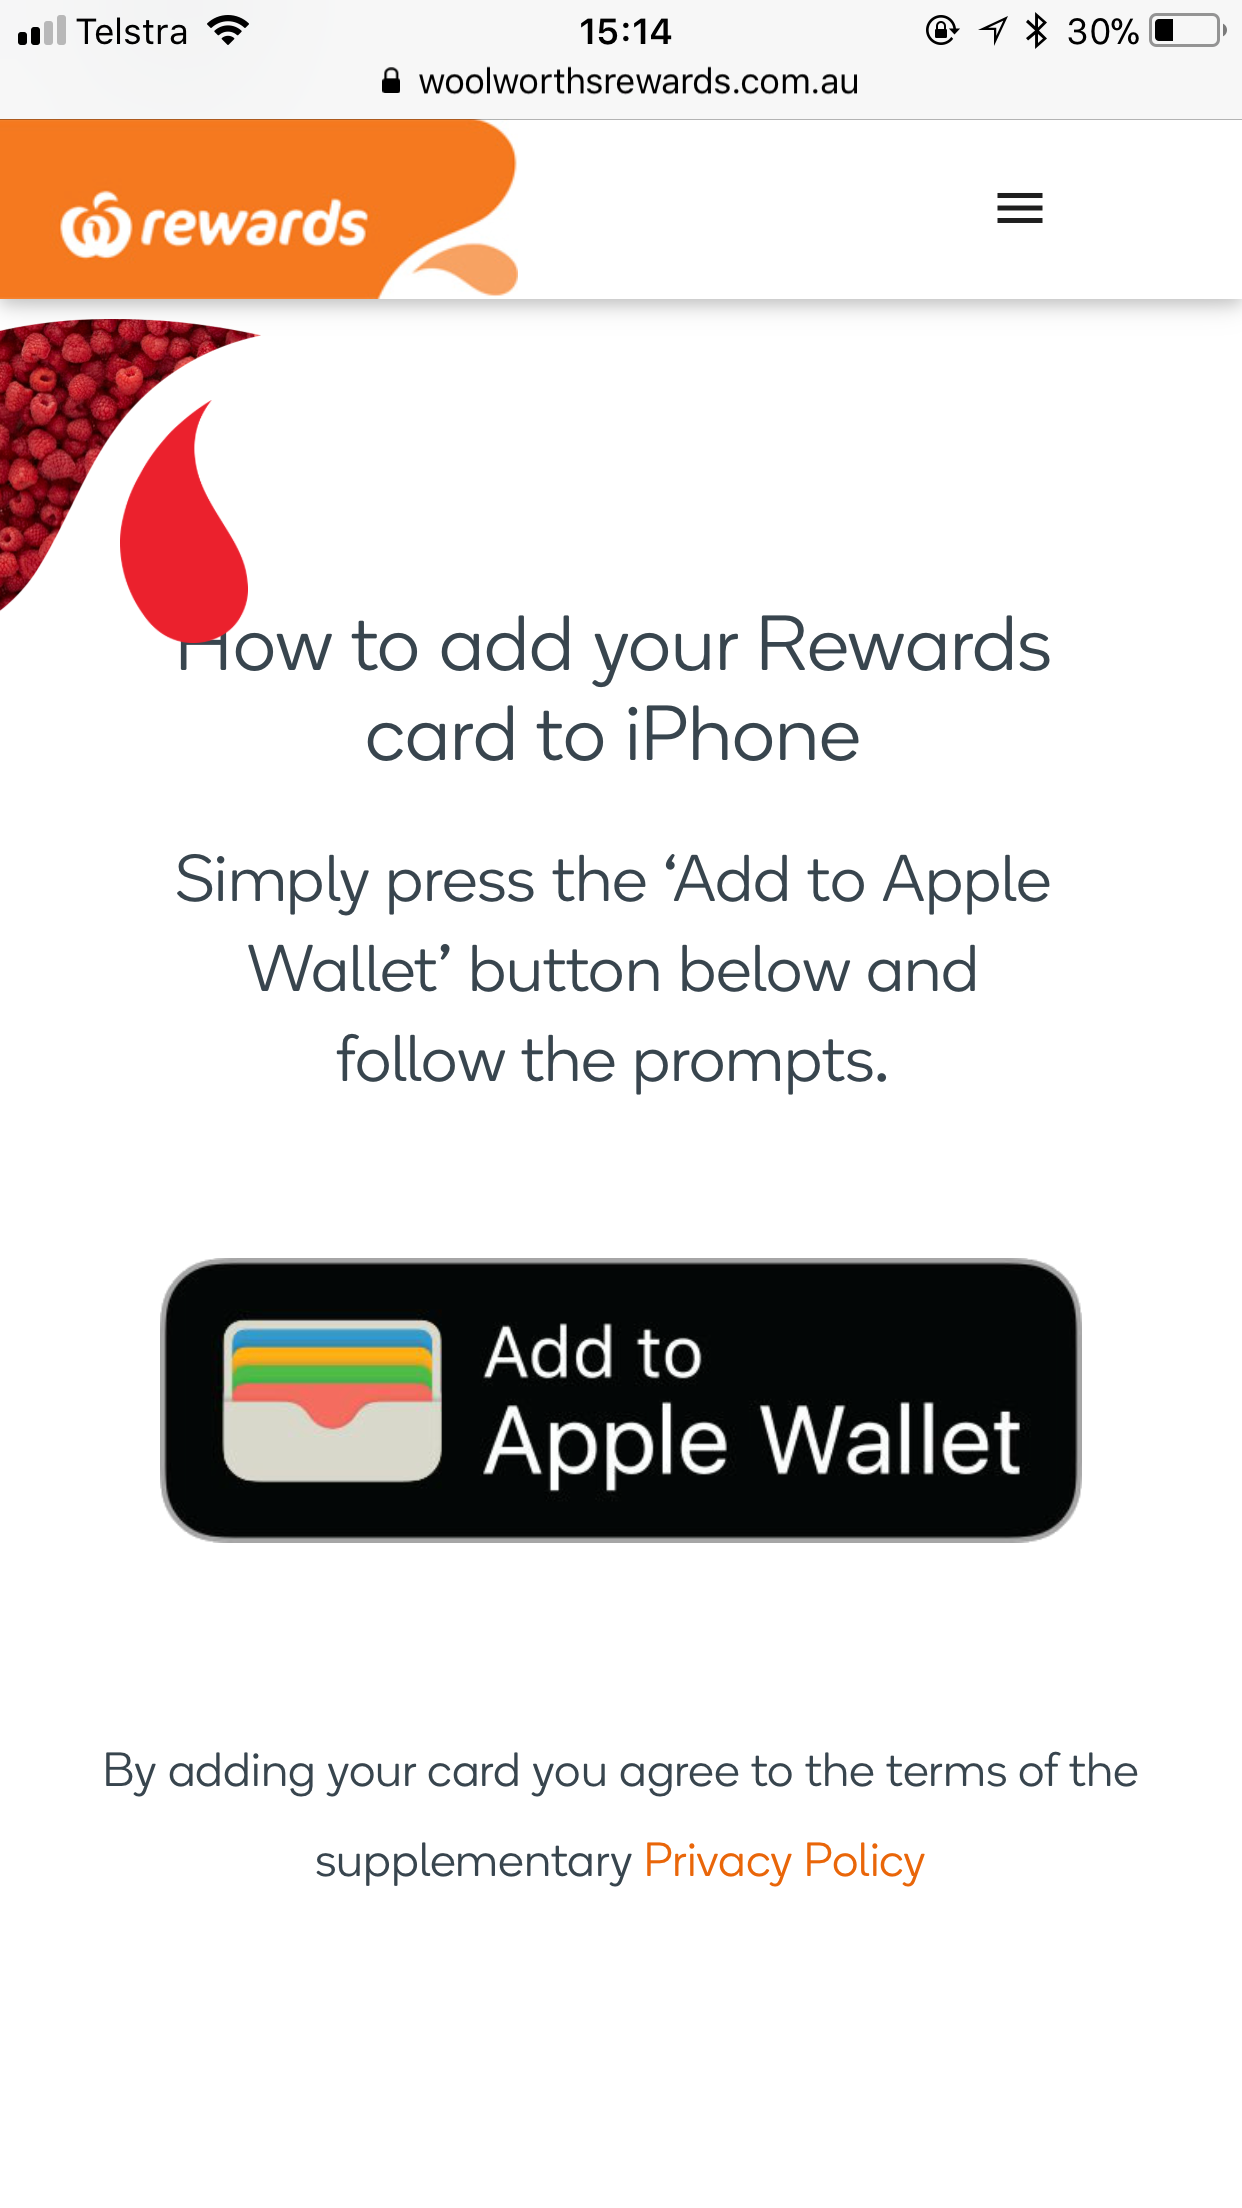 Woolworths Rewards Comes To The Iphone With Apple Wallet Support Tap Down Under